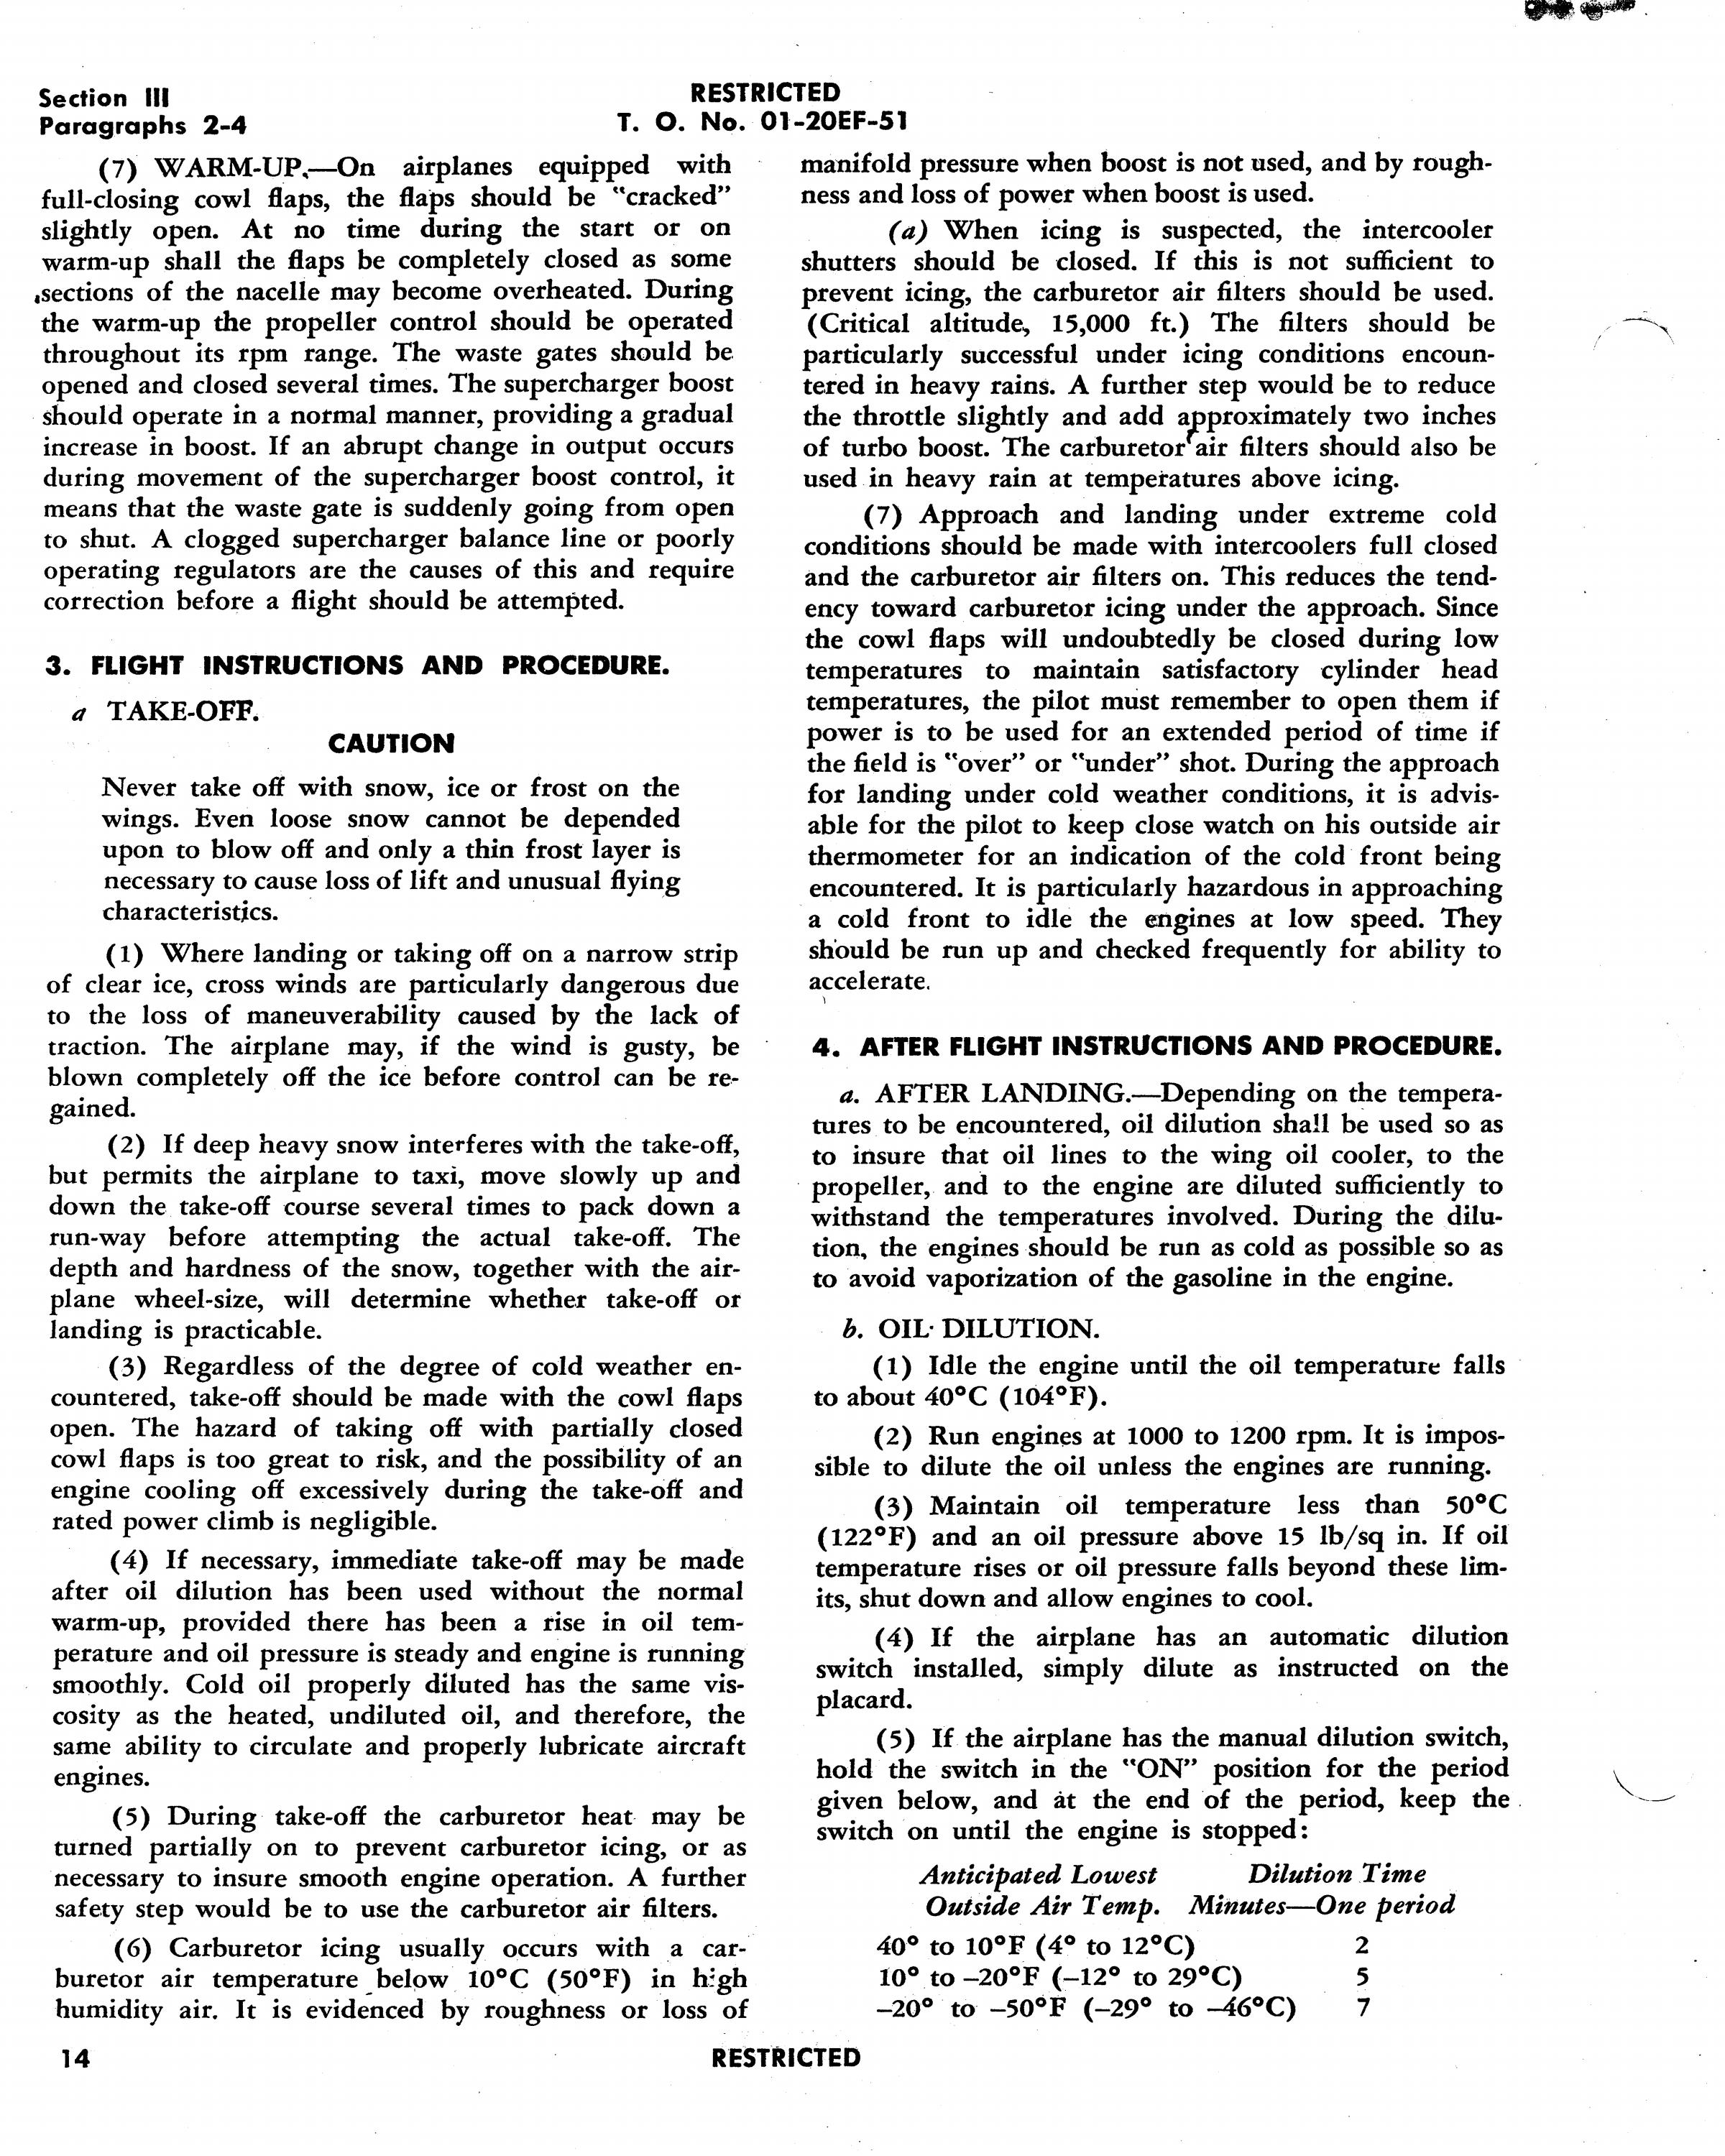 Sample page 18 from AirCorps Library document: Handbook of Cold Weather Operations & Maintenance - B17F, B-17G